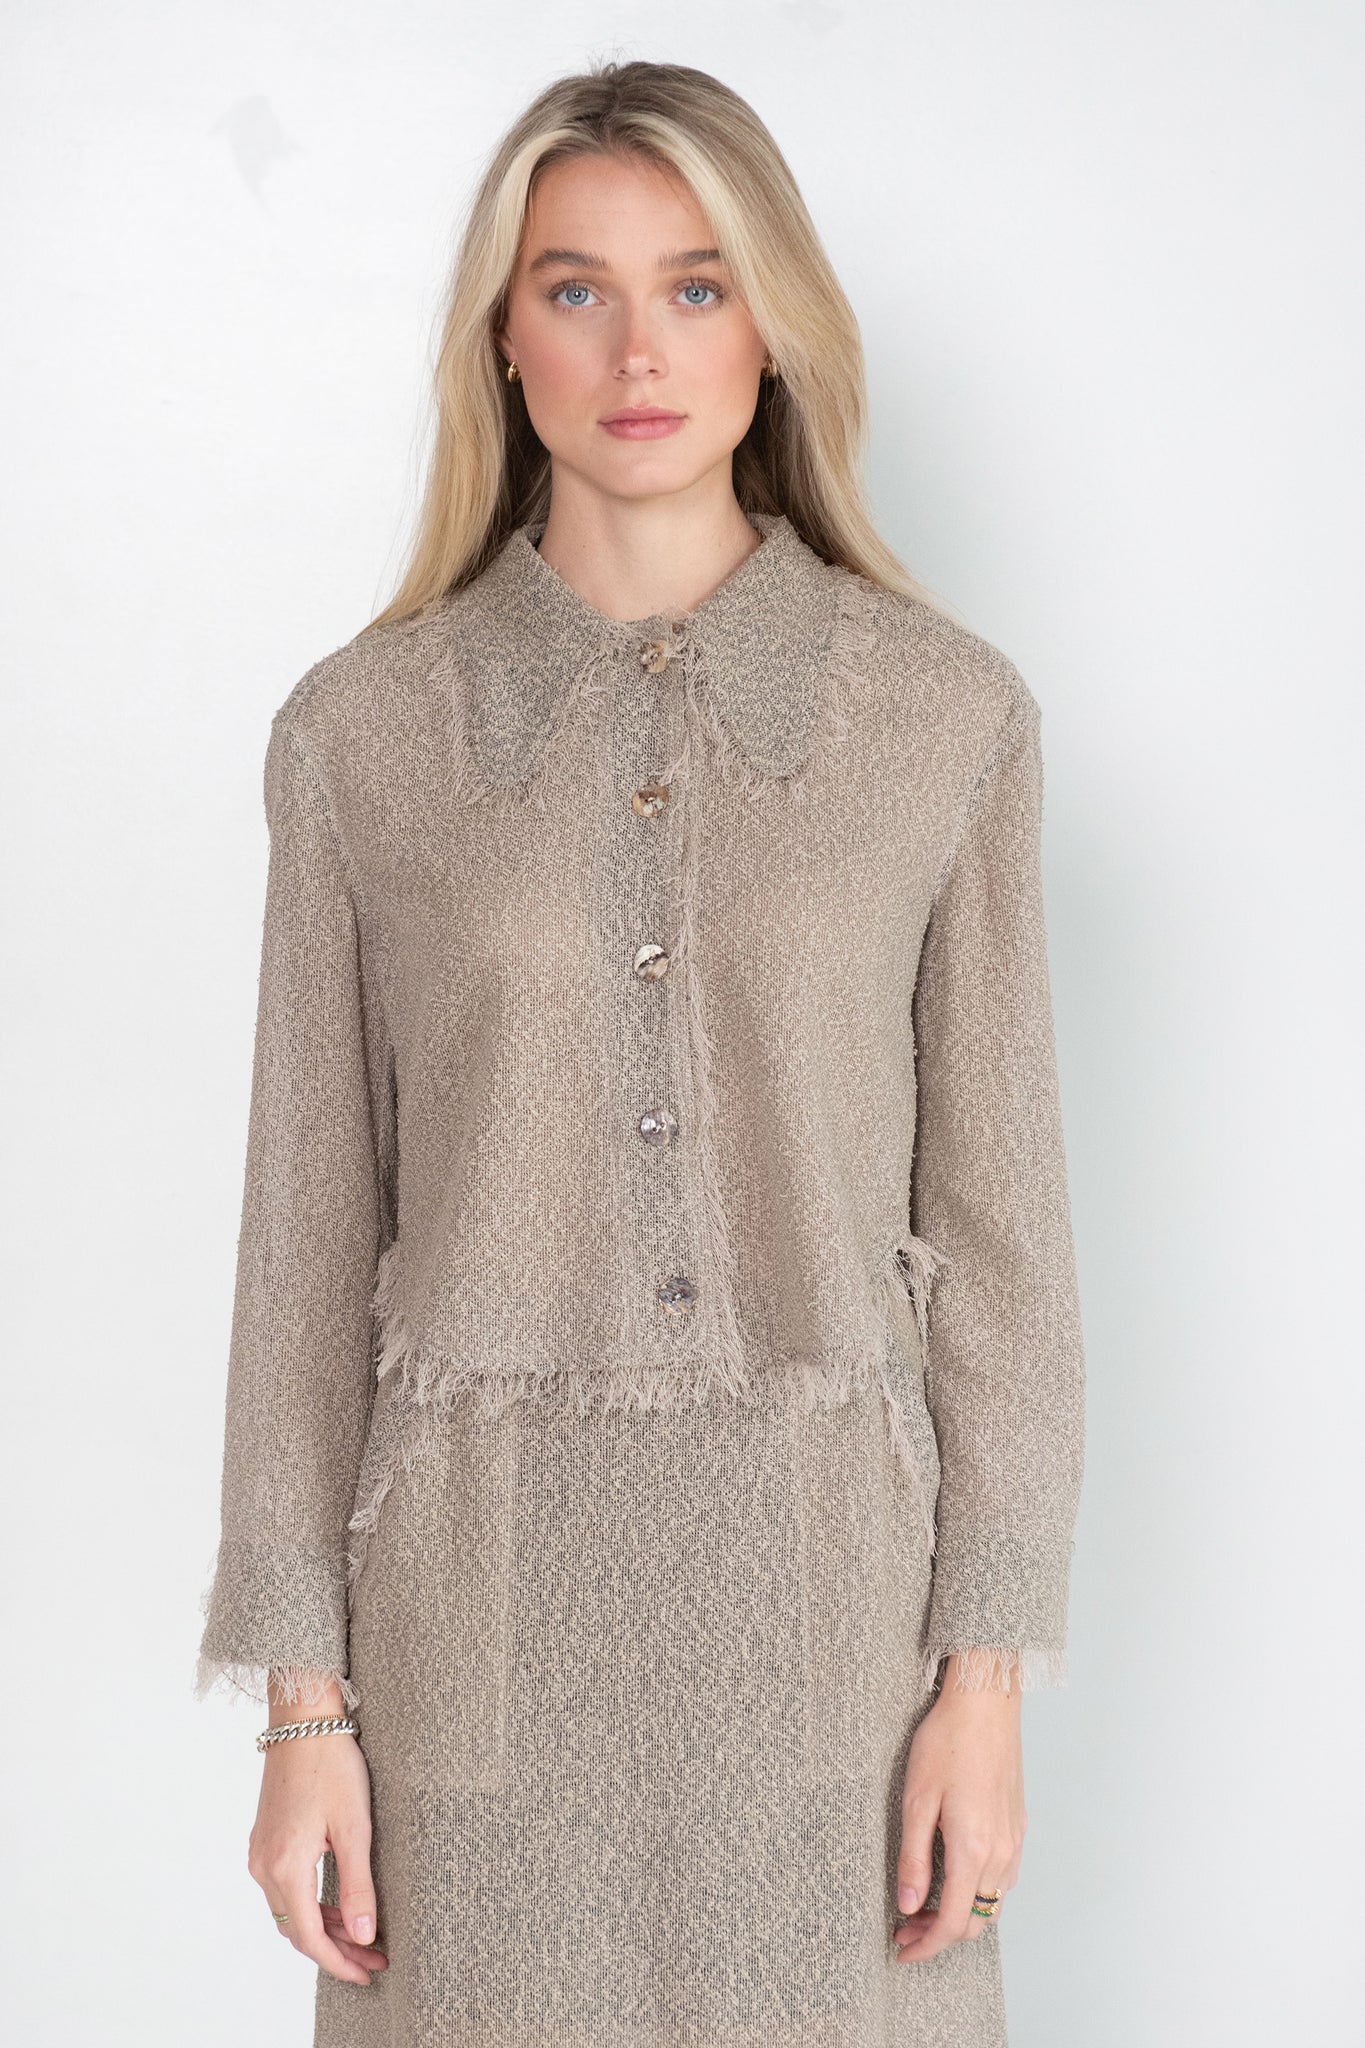 Veronique Leroy - Rounded Collar Shirt, Sand